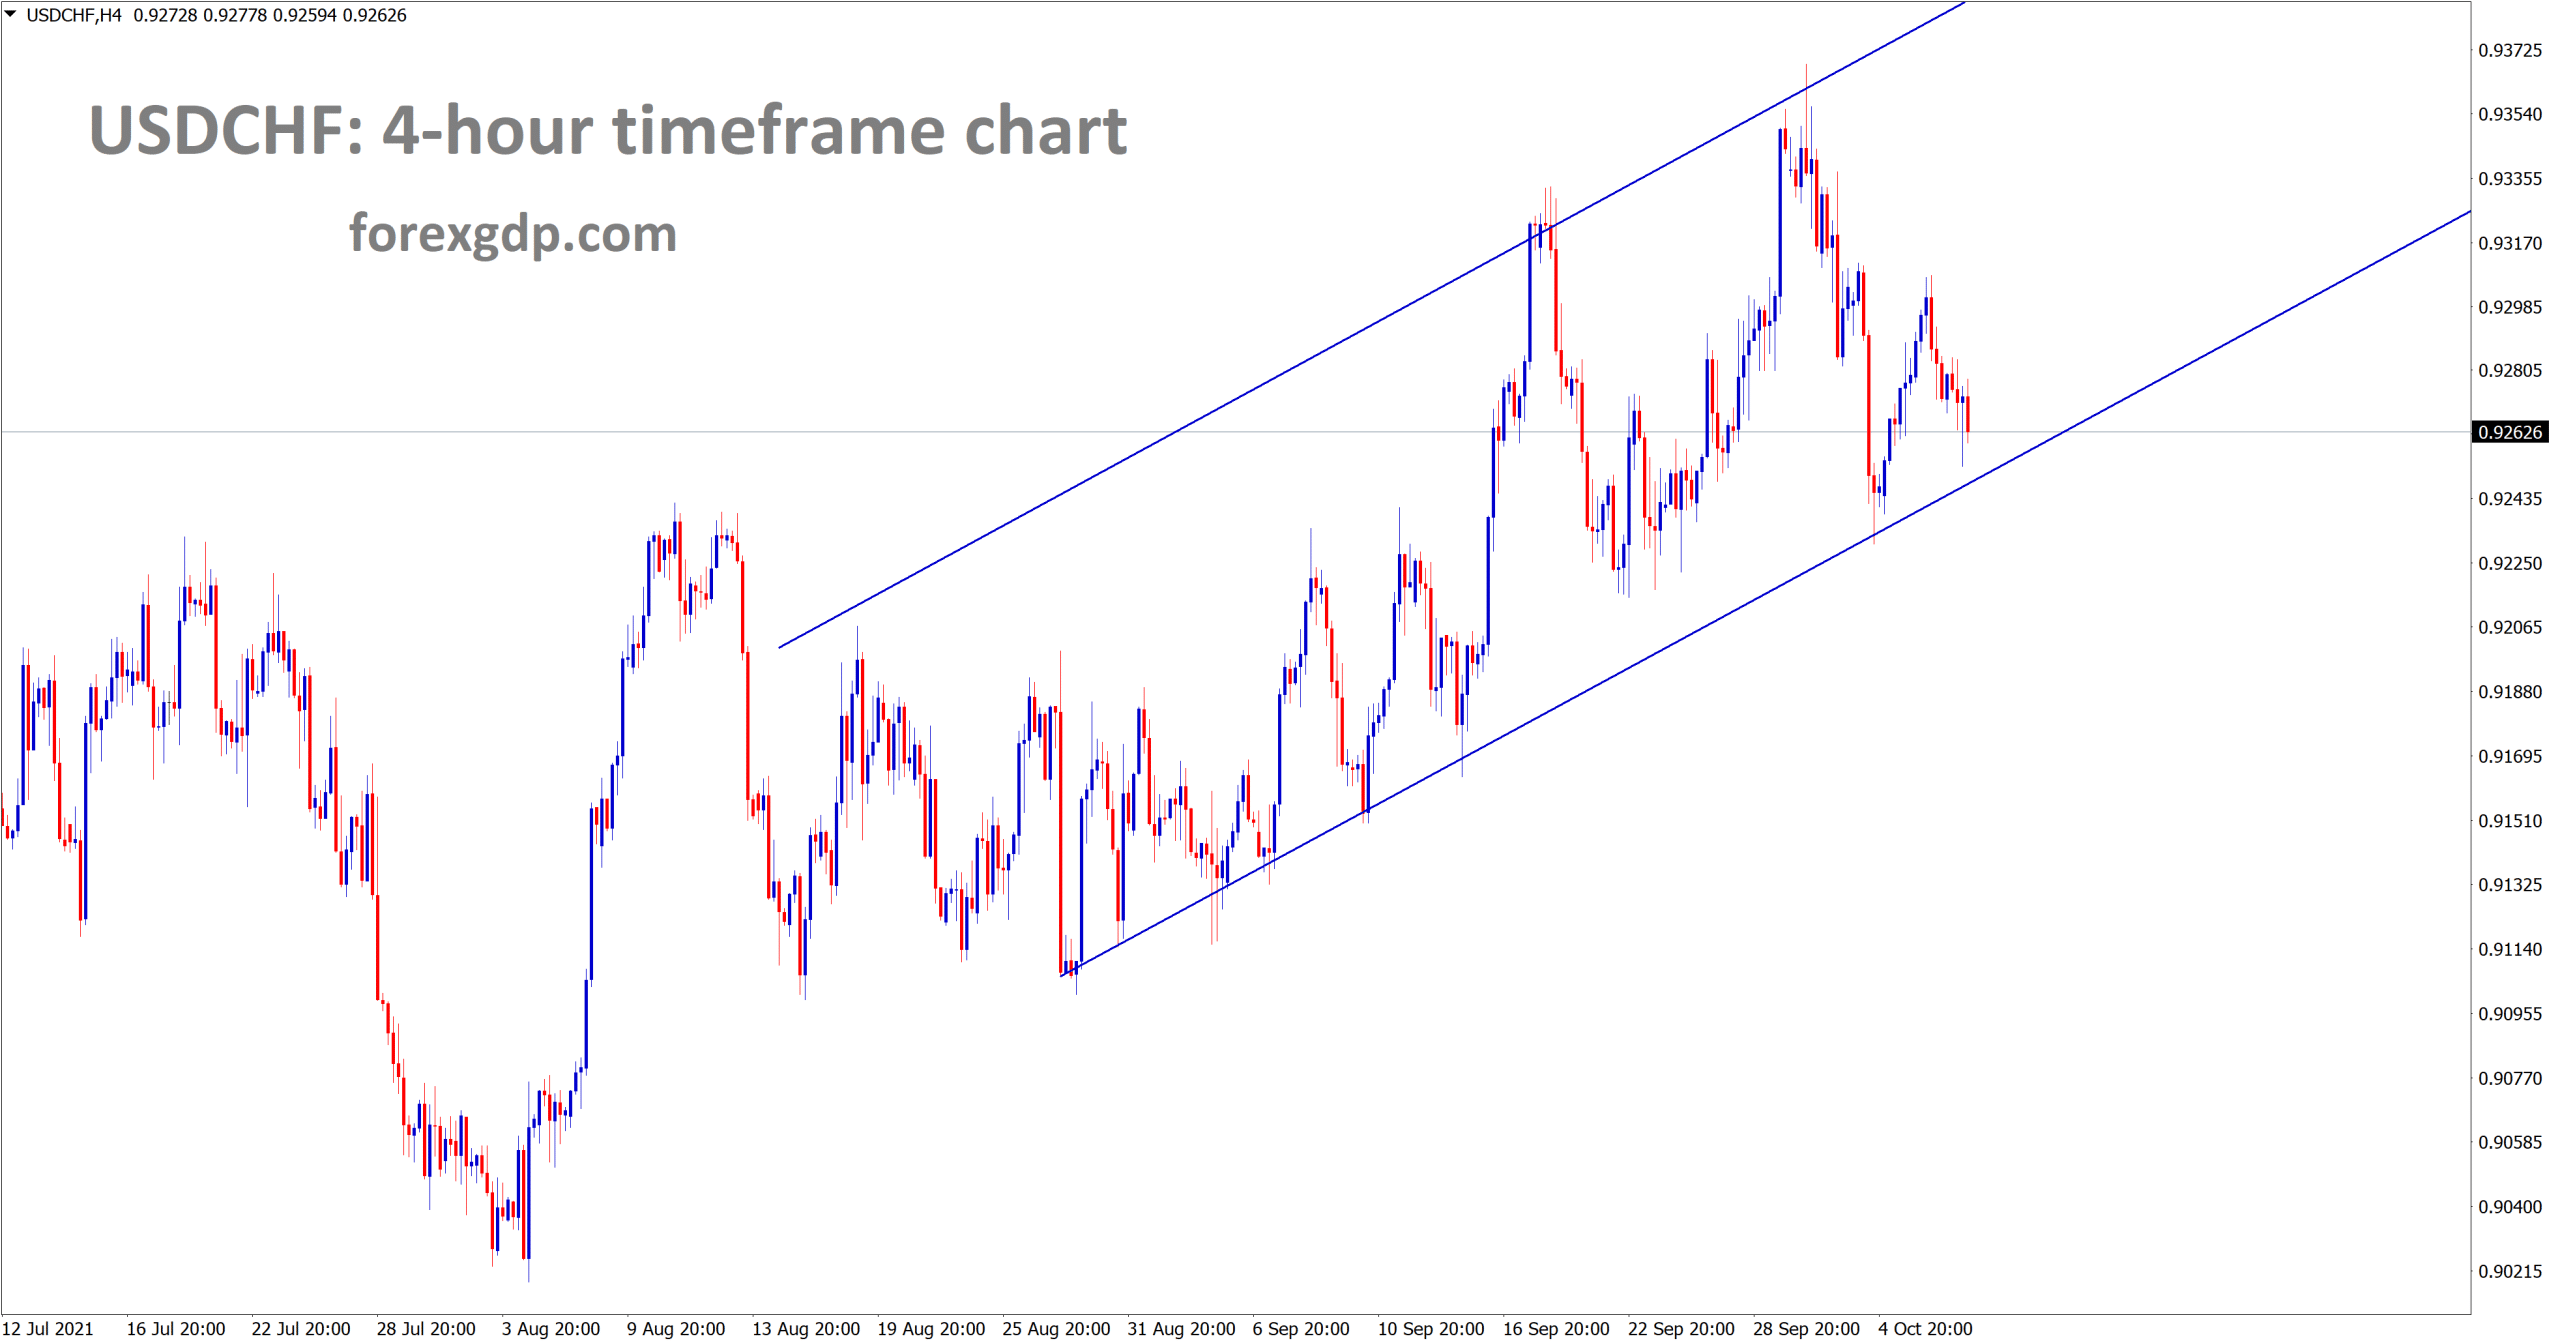 USDCHF is moving in an Ascending channel